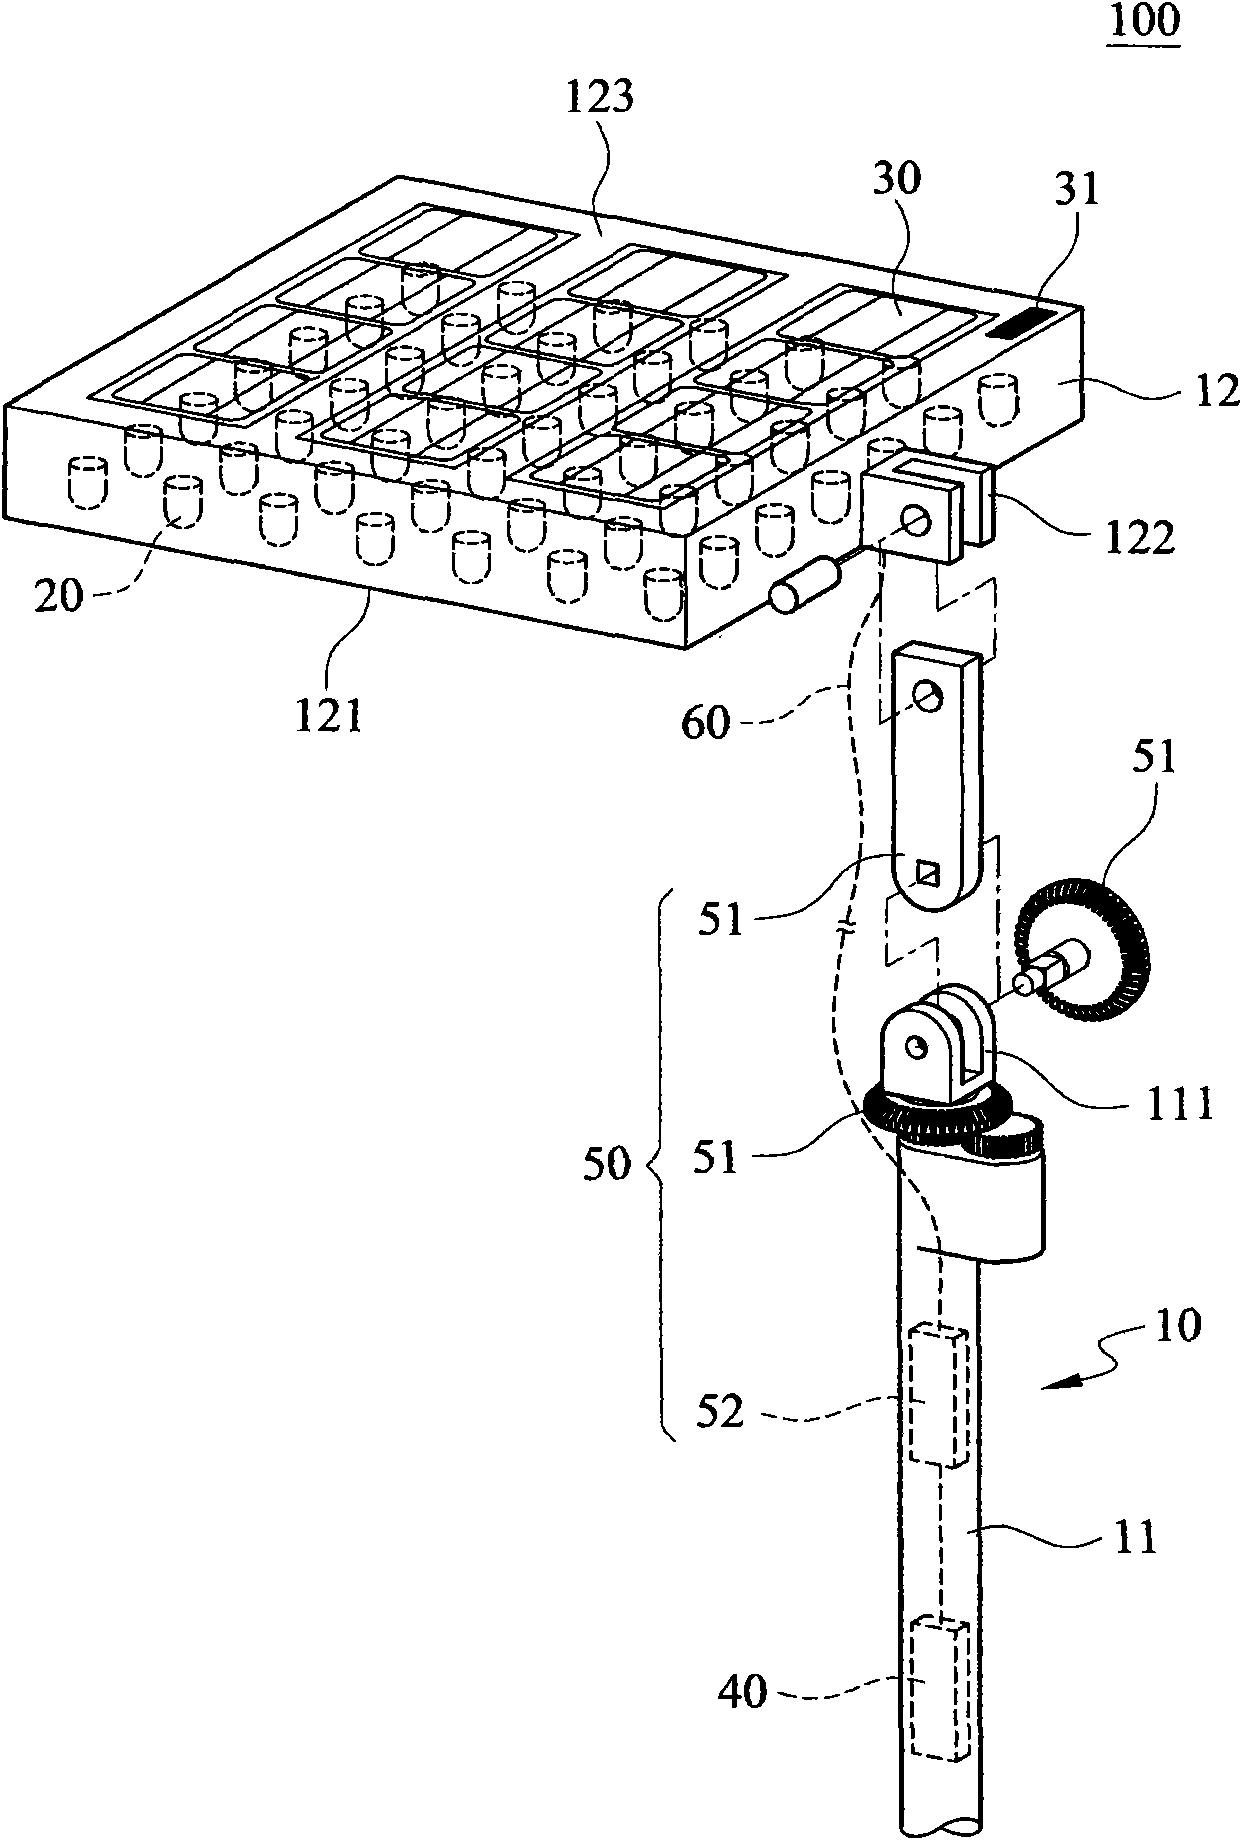 Solar street lamp structure with adjustable angle